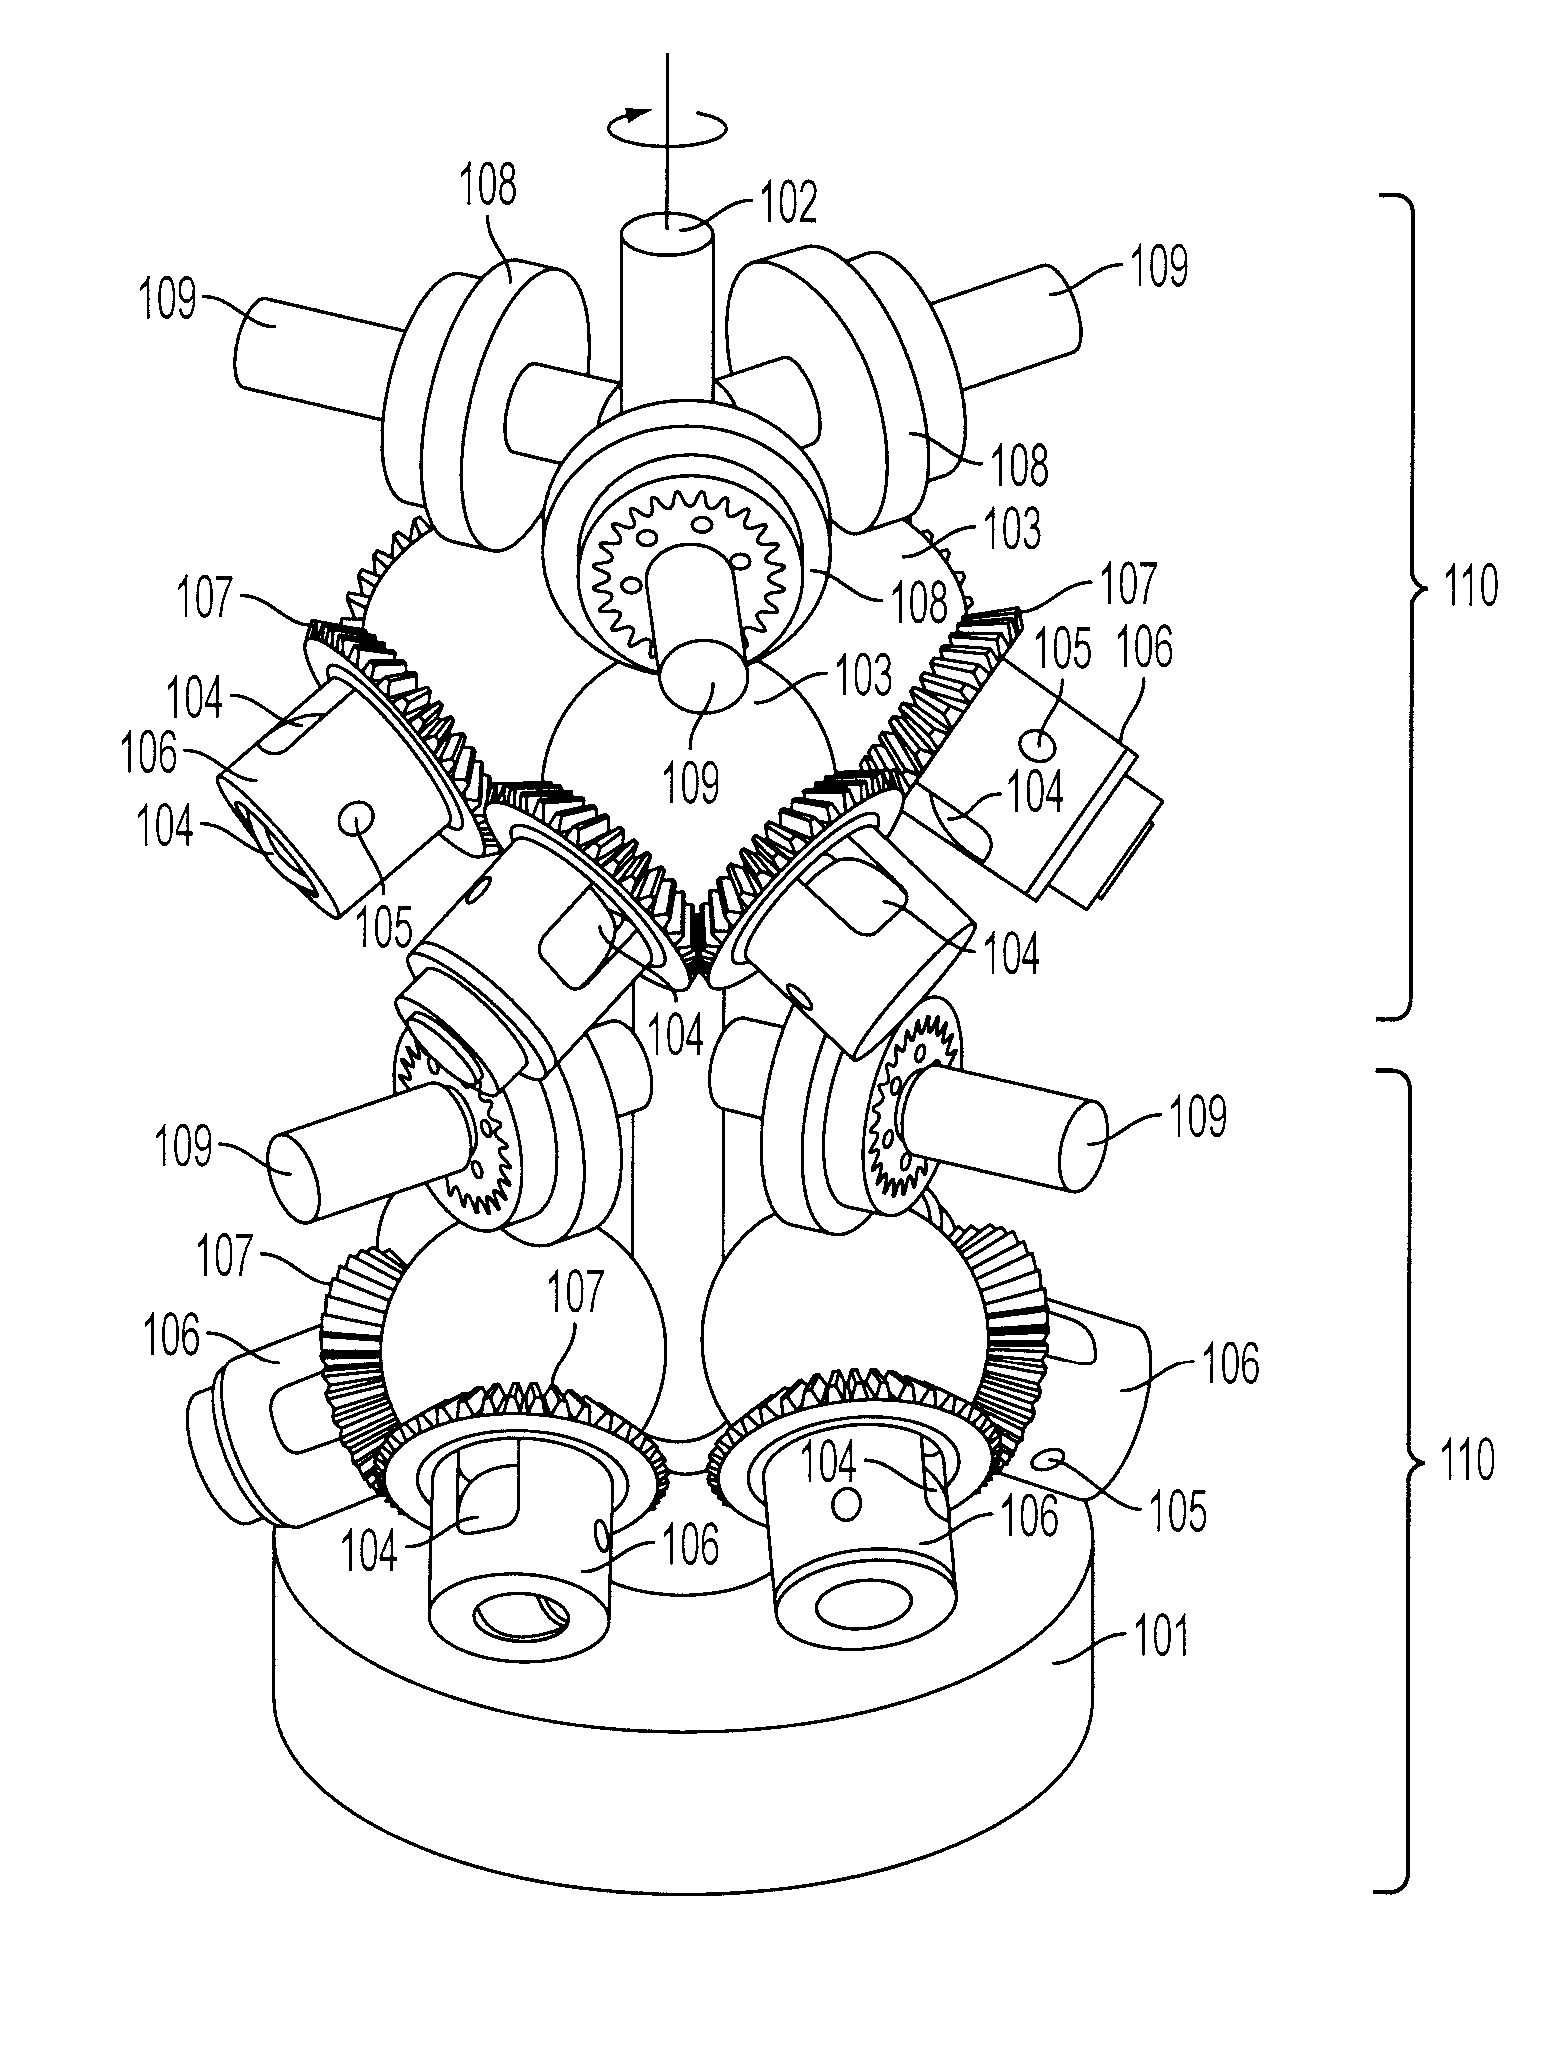 Continuously Variable Transmission with Mutliple Outputs